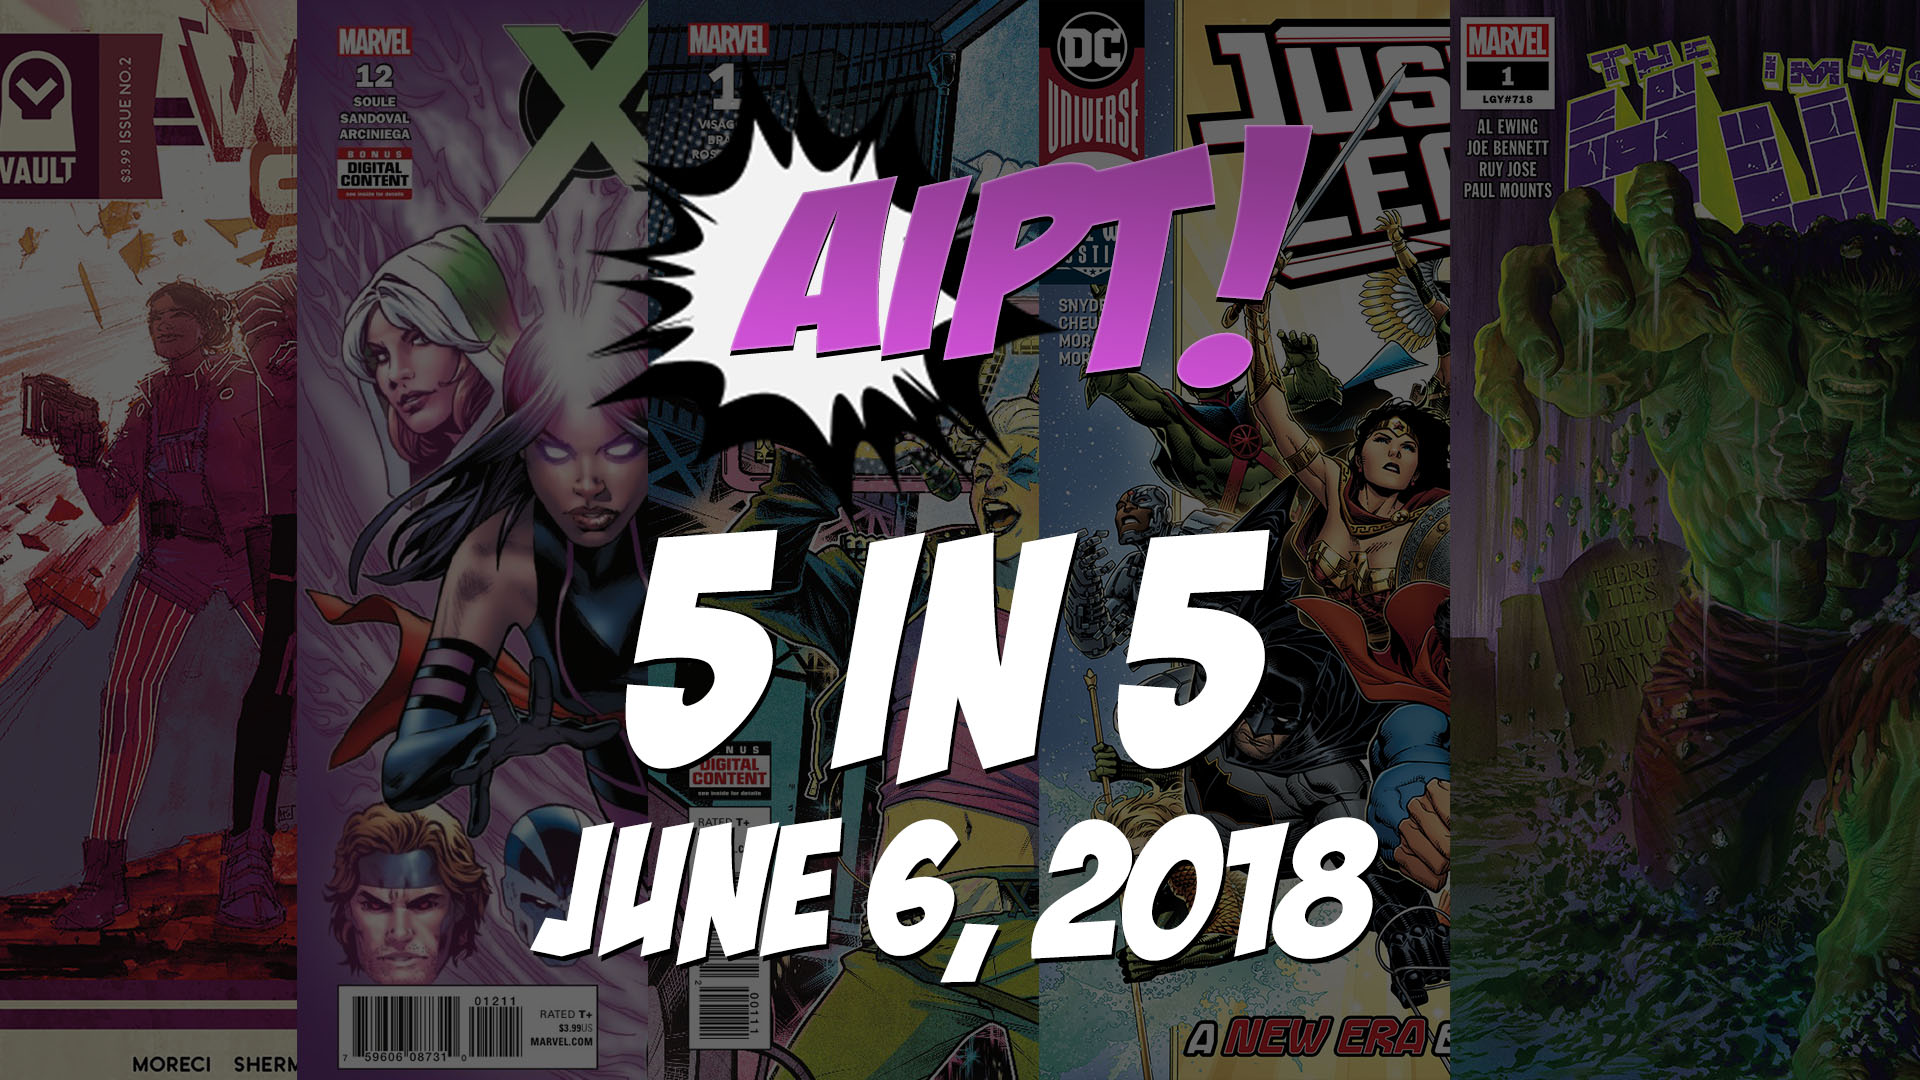 June 6, 2018's 5 in 5: The five comic books you should buy this week